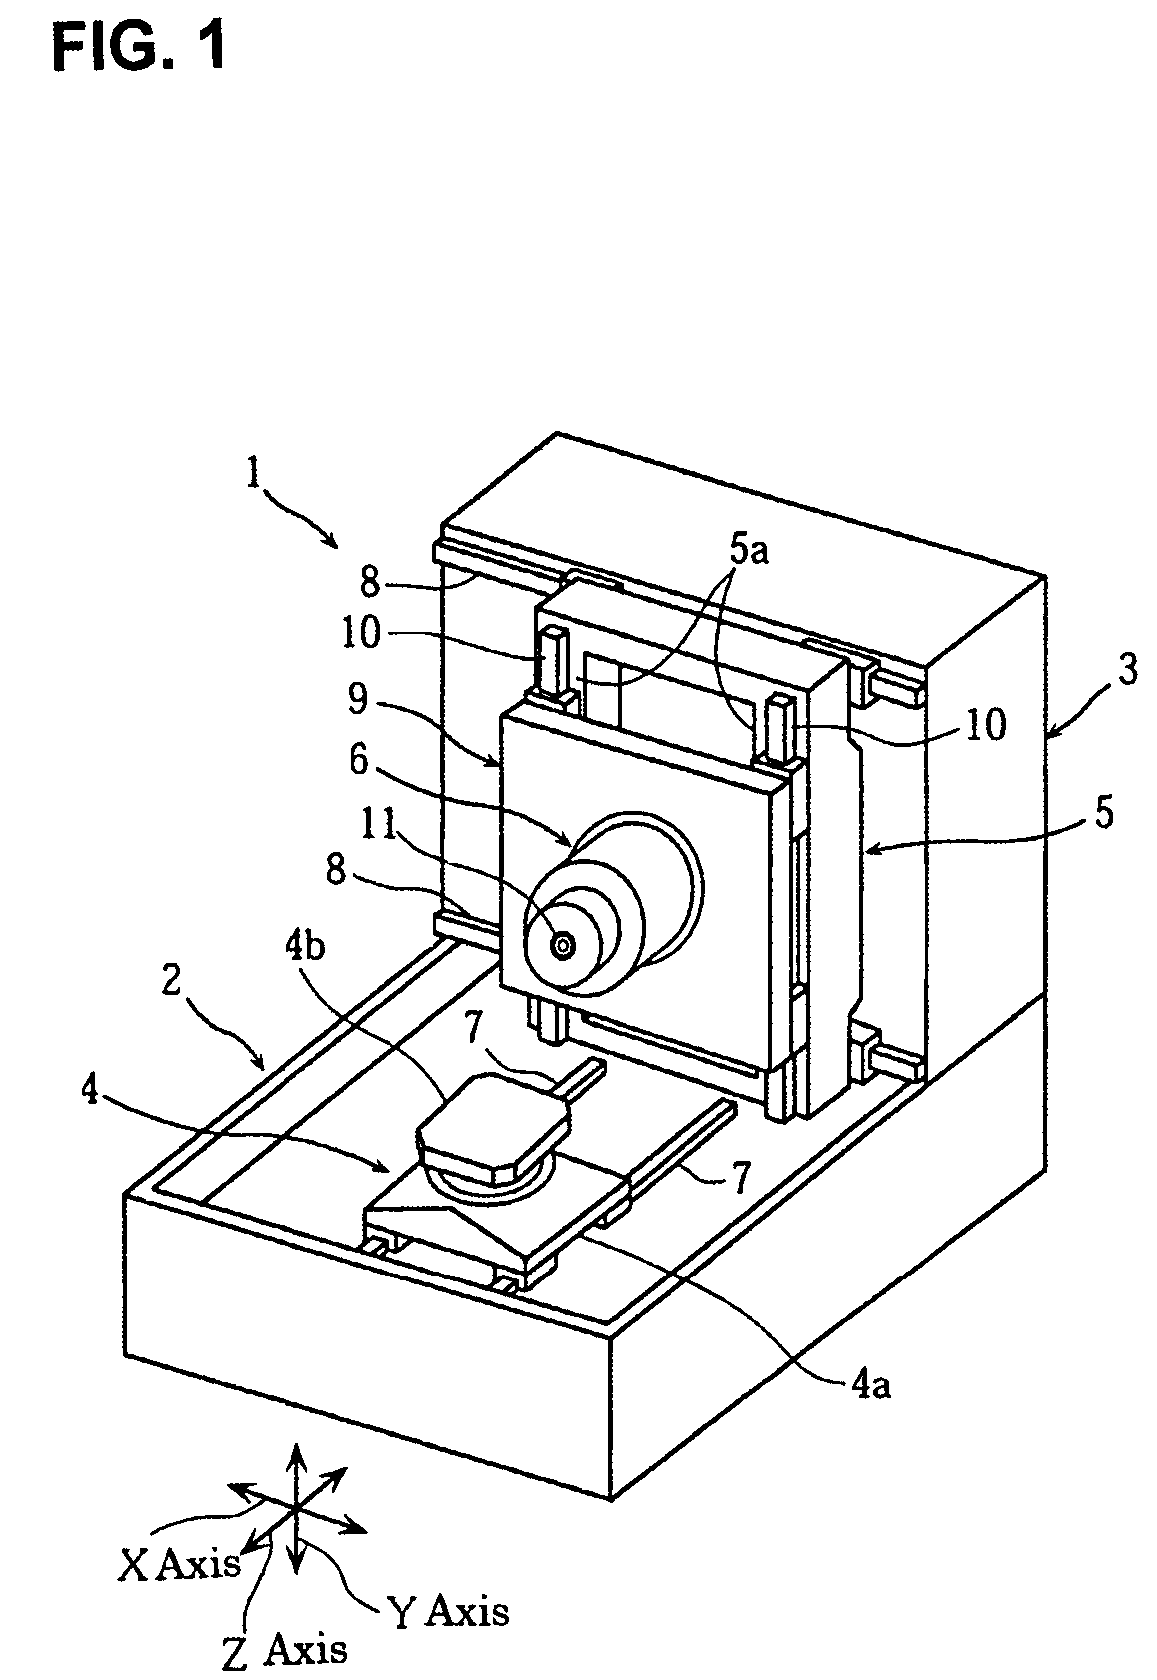 Chattering vibration inhibiting mechanism of machine tool